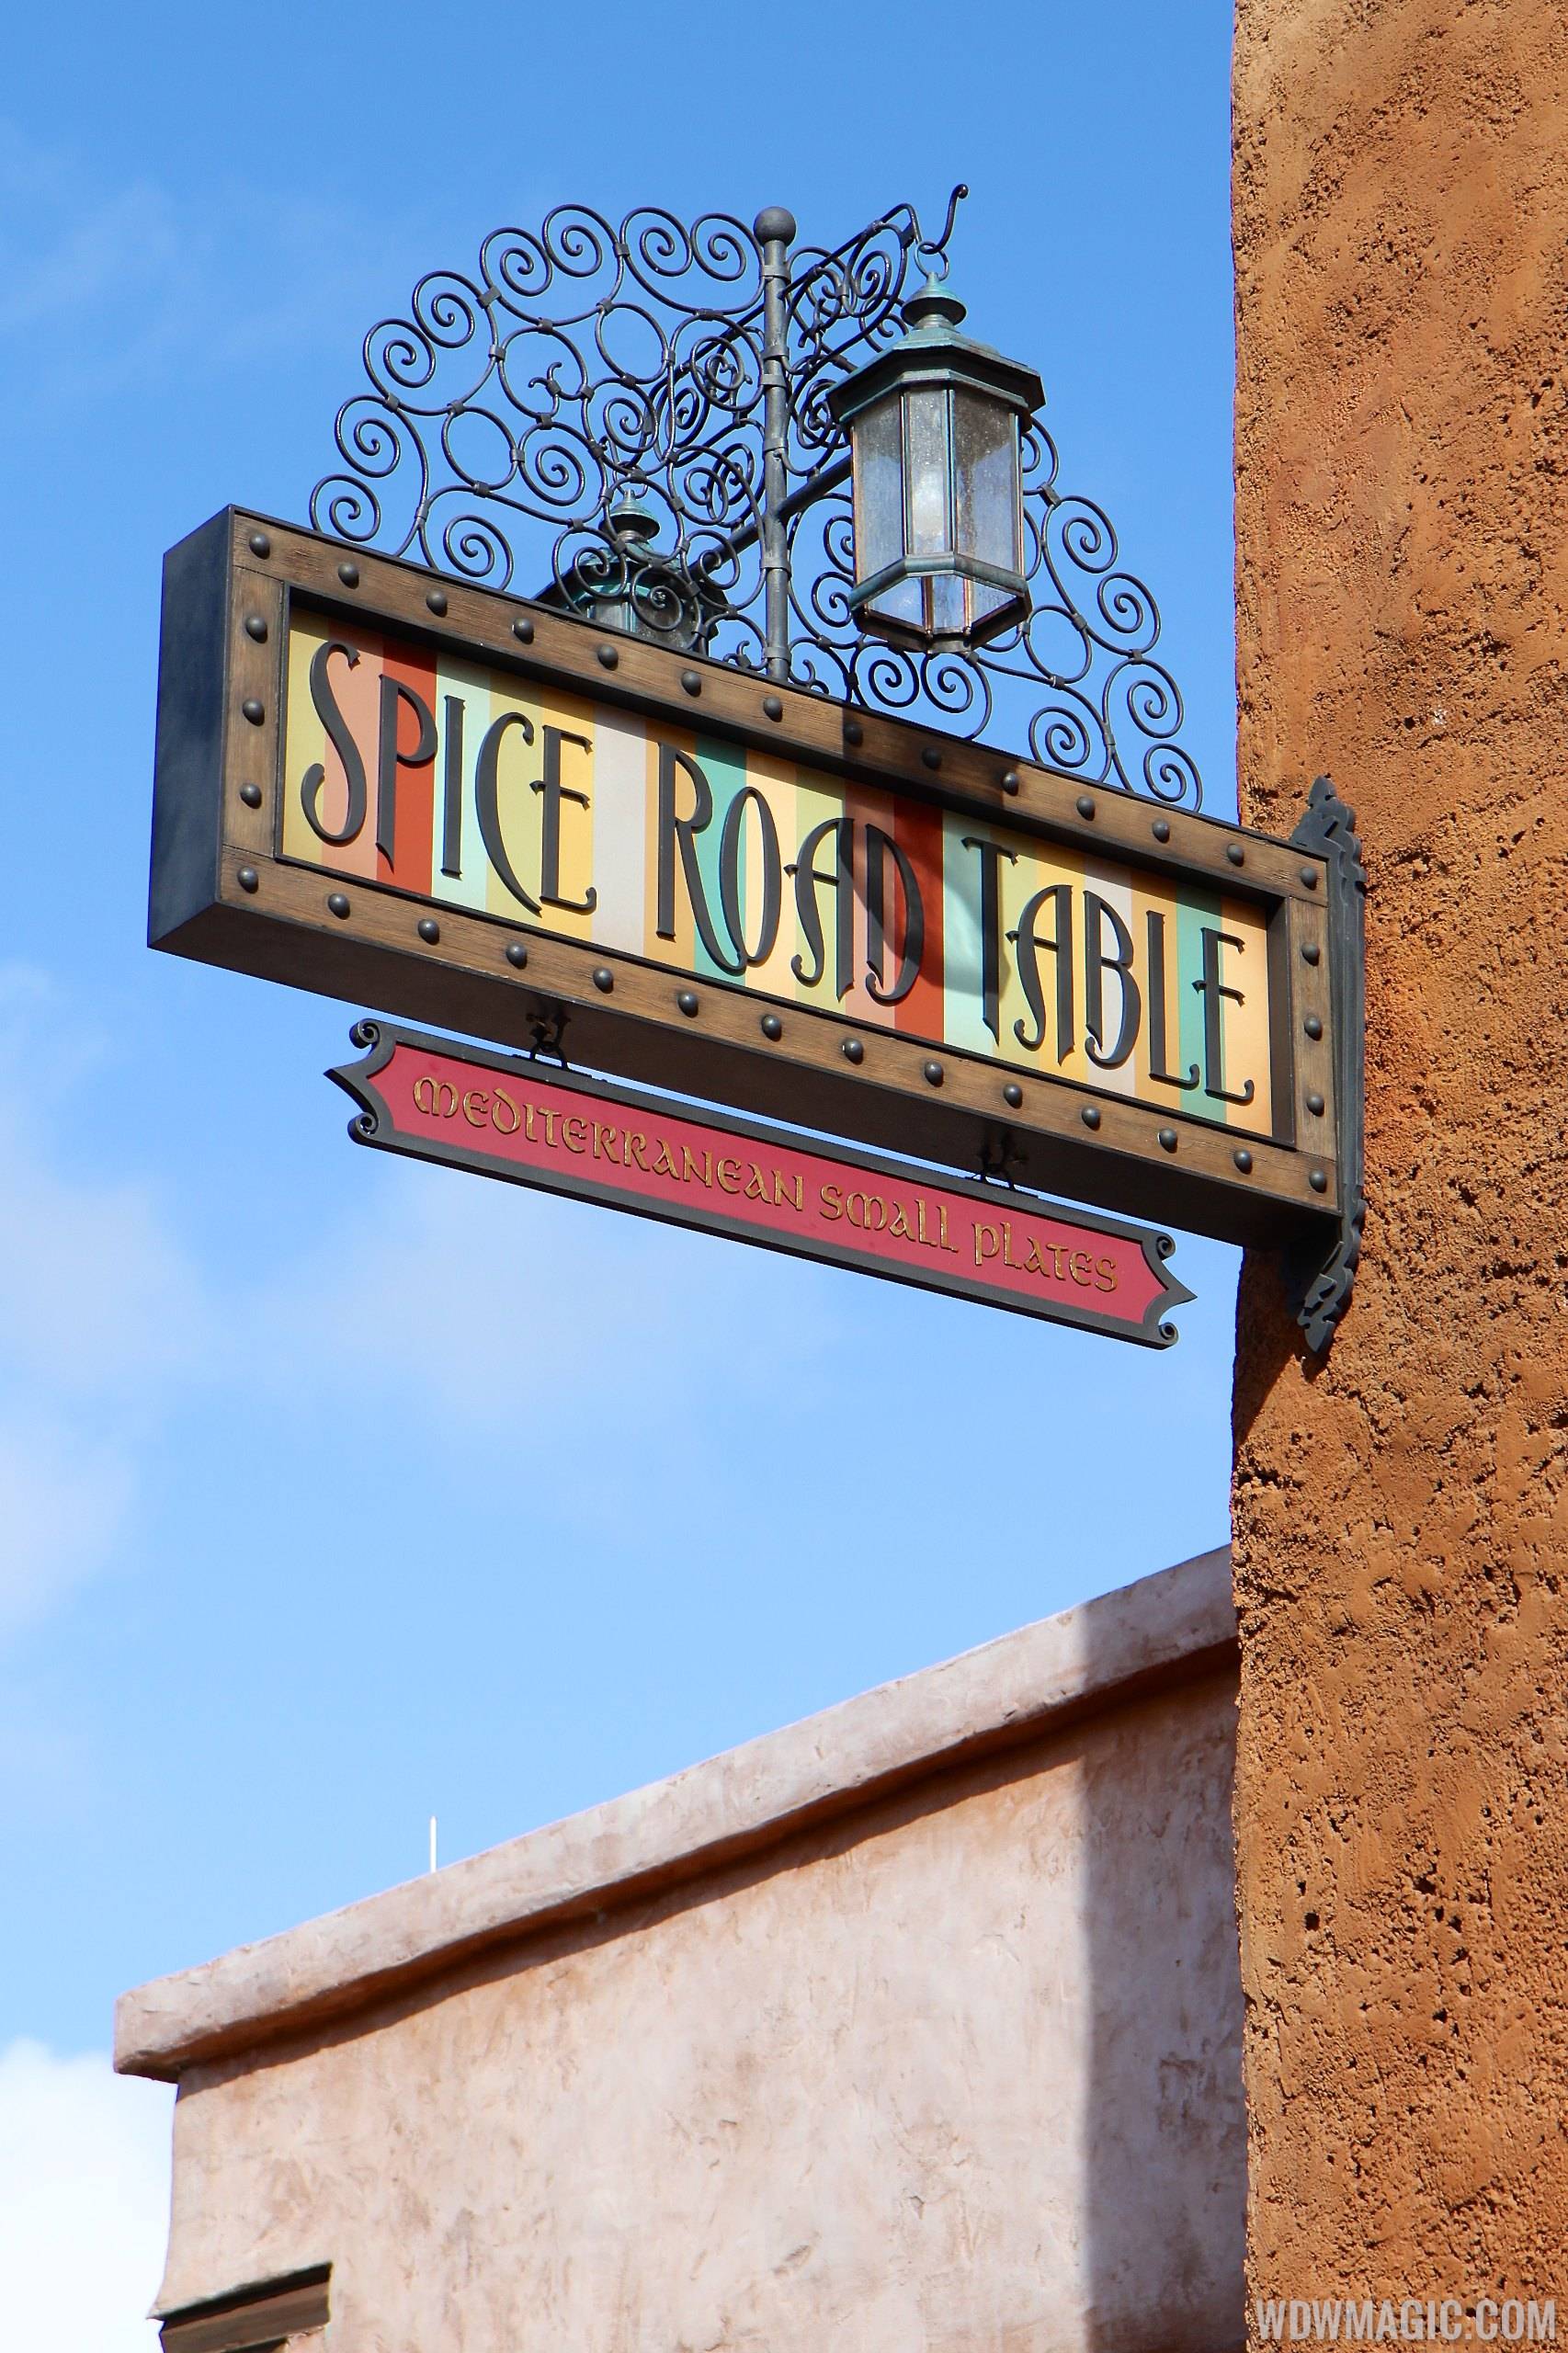 Spice Road Table sign